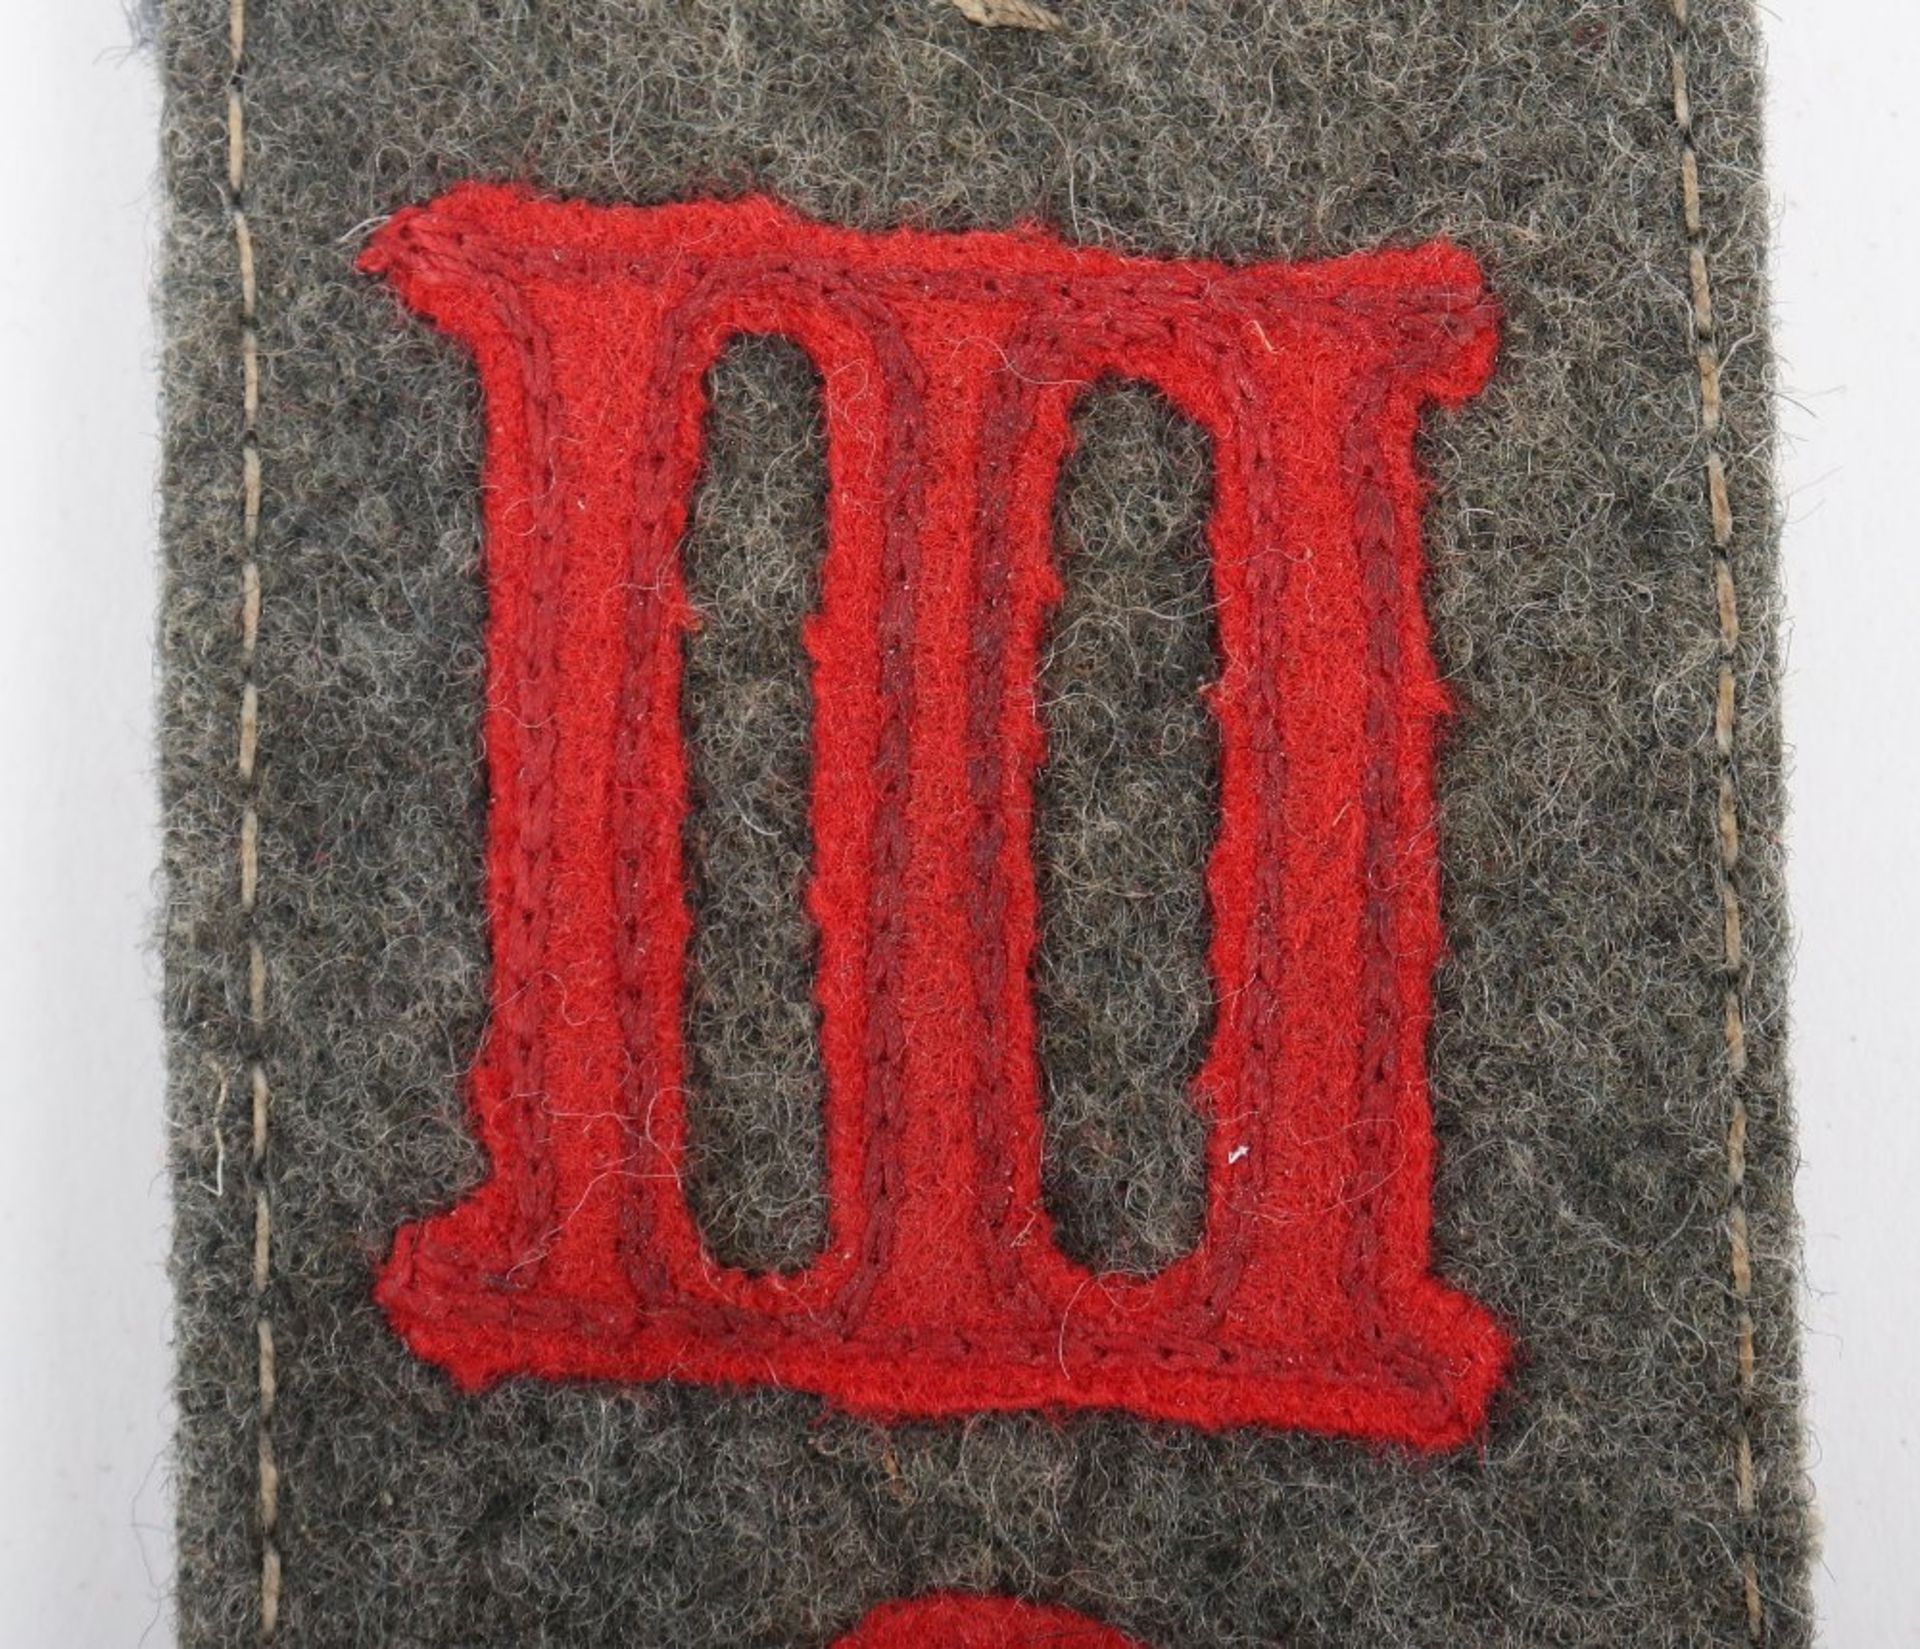 WW1 German BA III Armee Korps (6th) (Army Corps Clothing Offices) Simplified Shoulder Strap - Image 2 of 6